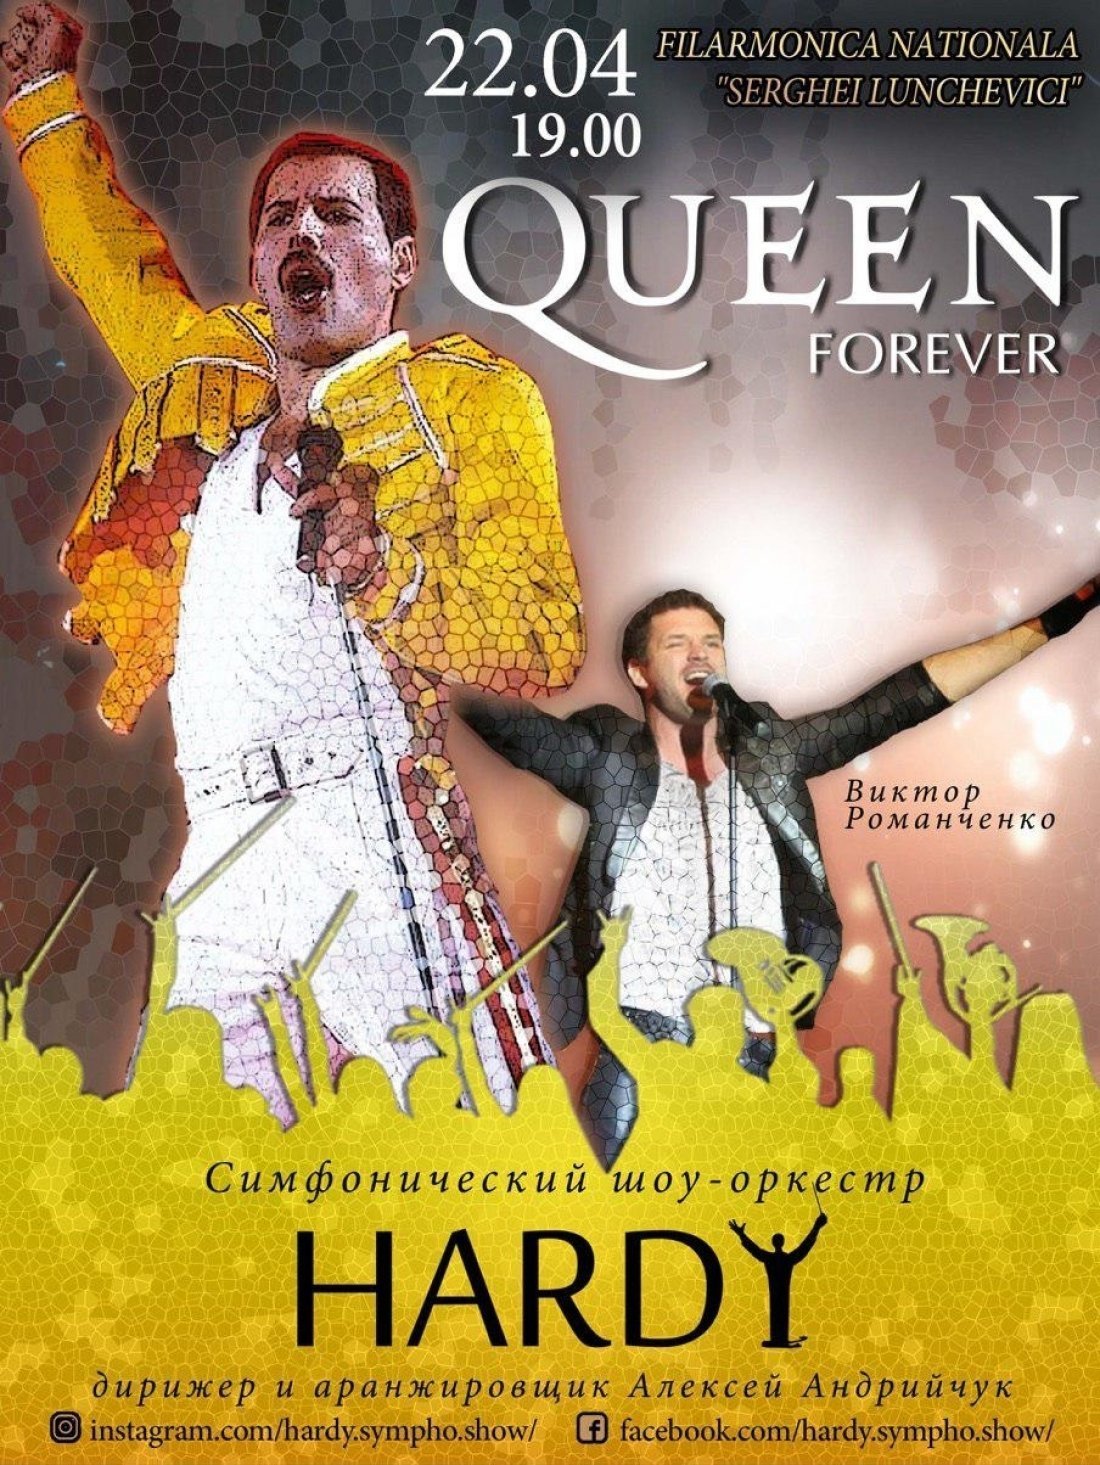 HARDY Queen Forever